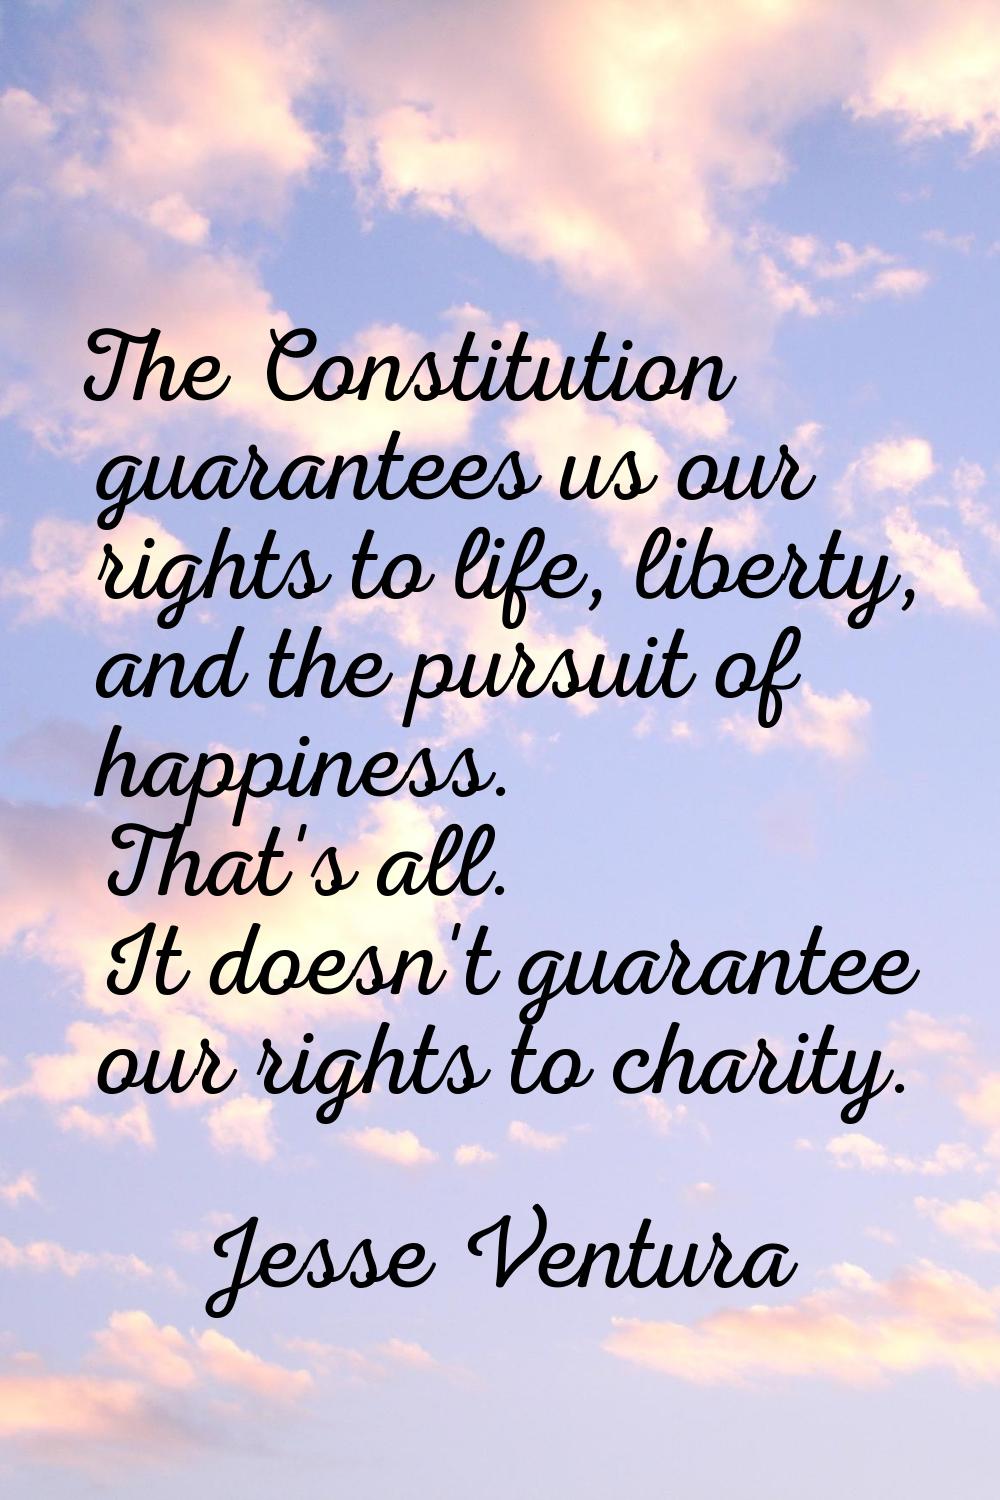 The Constitution guarantees us our rights to life, liberty, and the pursuit of happiness. That's al